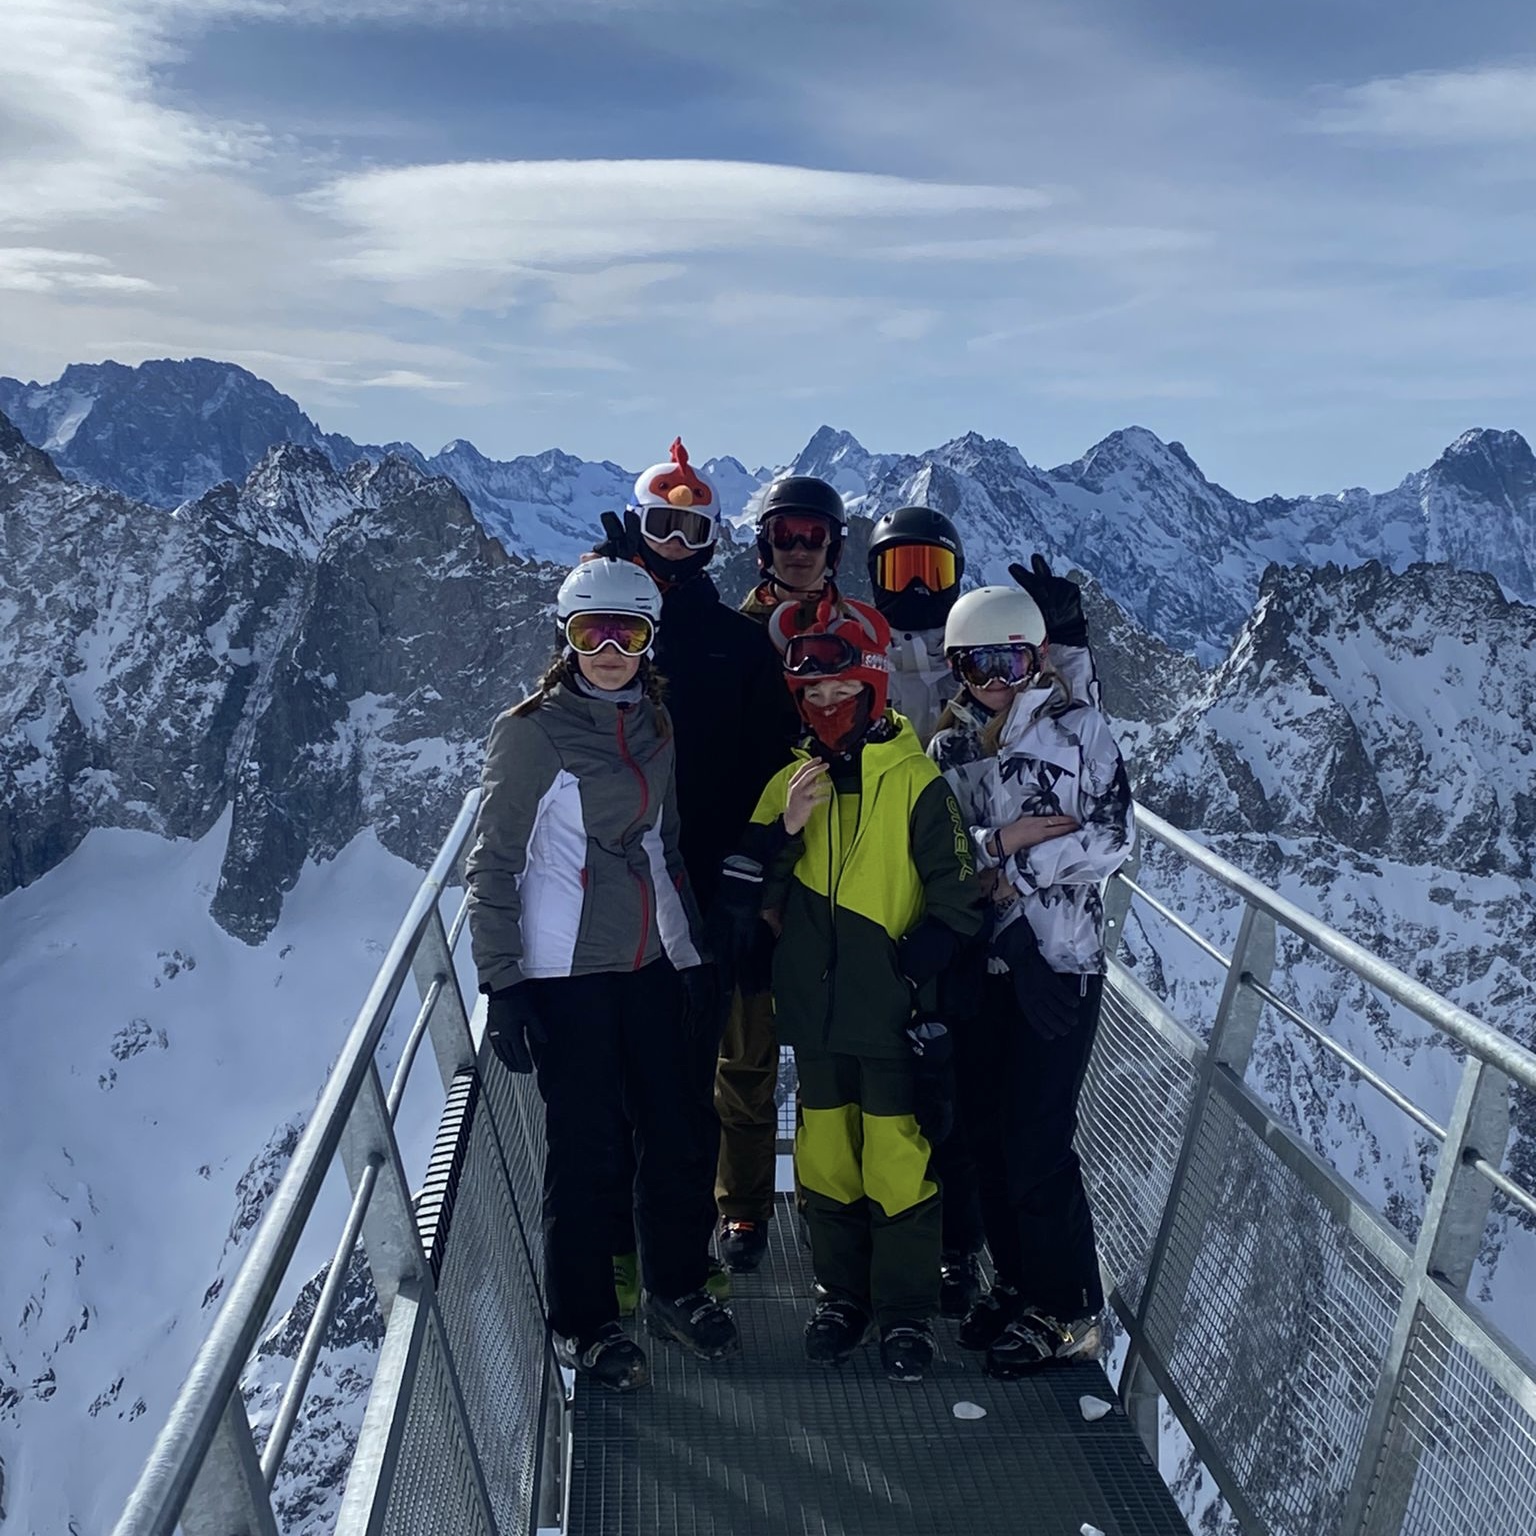 Group photo, in front of mountains